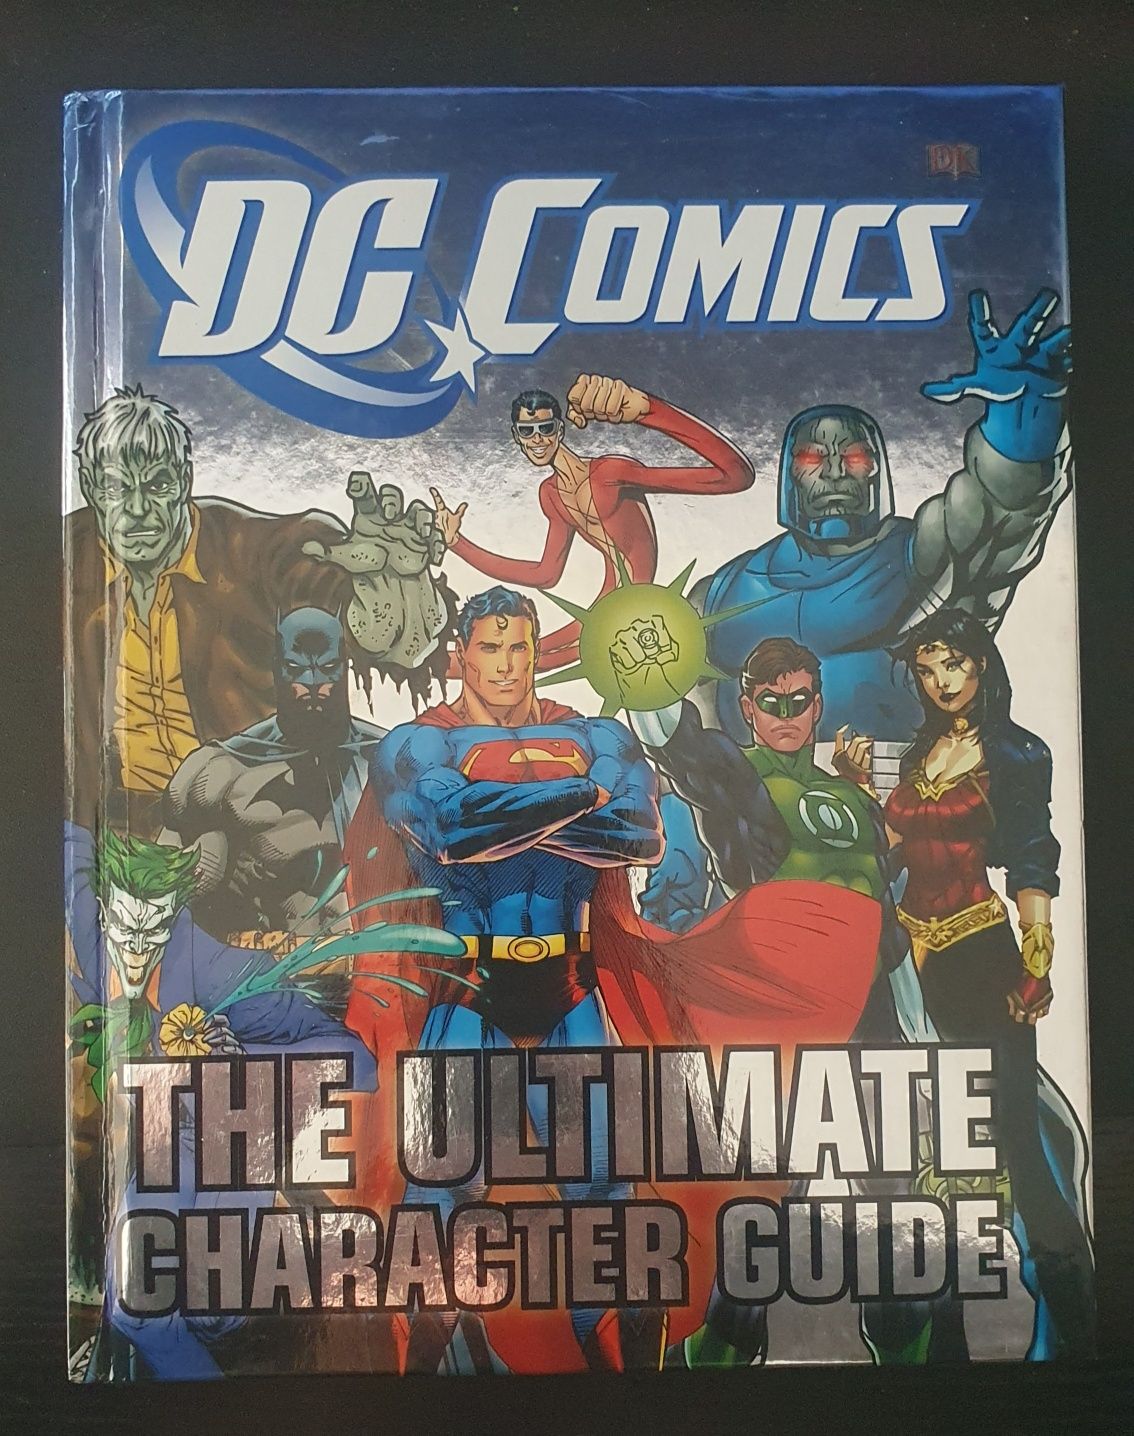 Livro "DC Comics The Ultimate Character Guide"